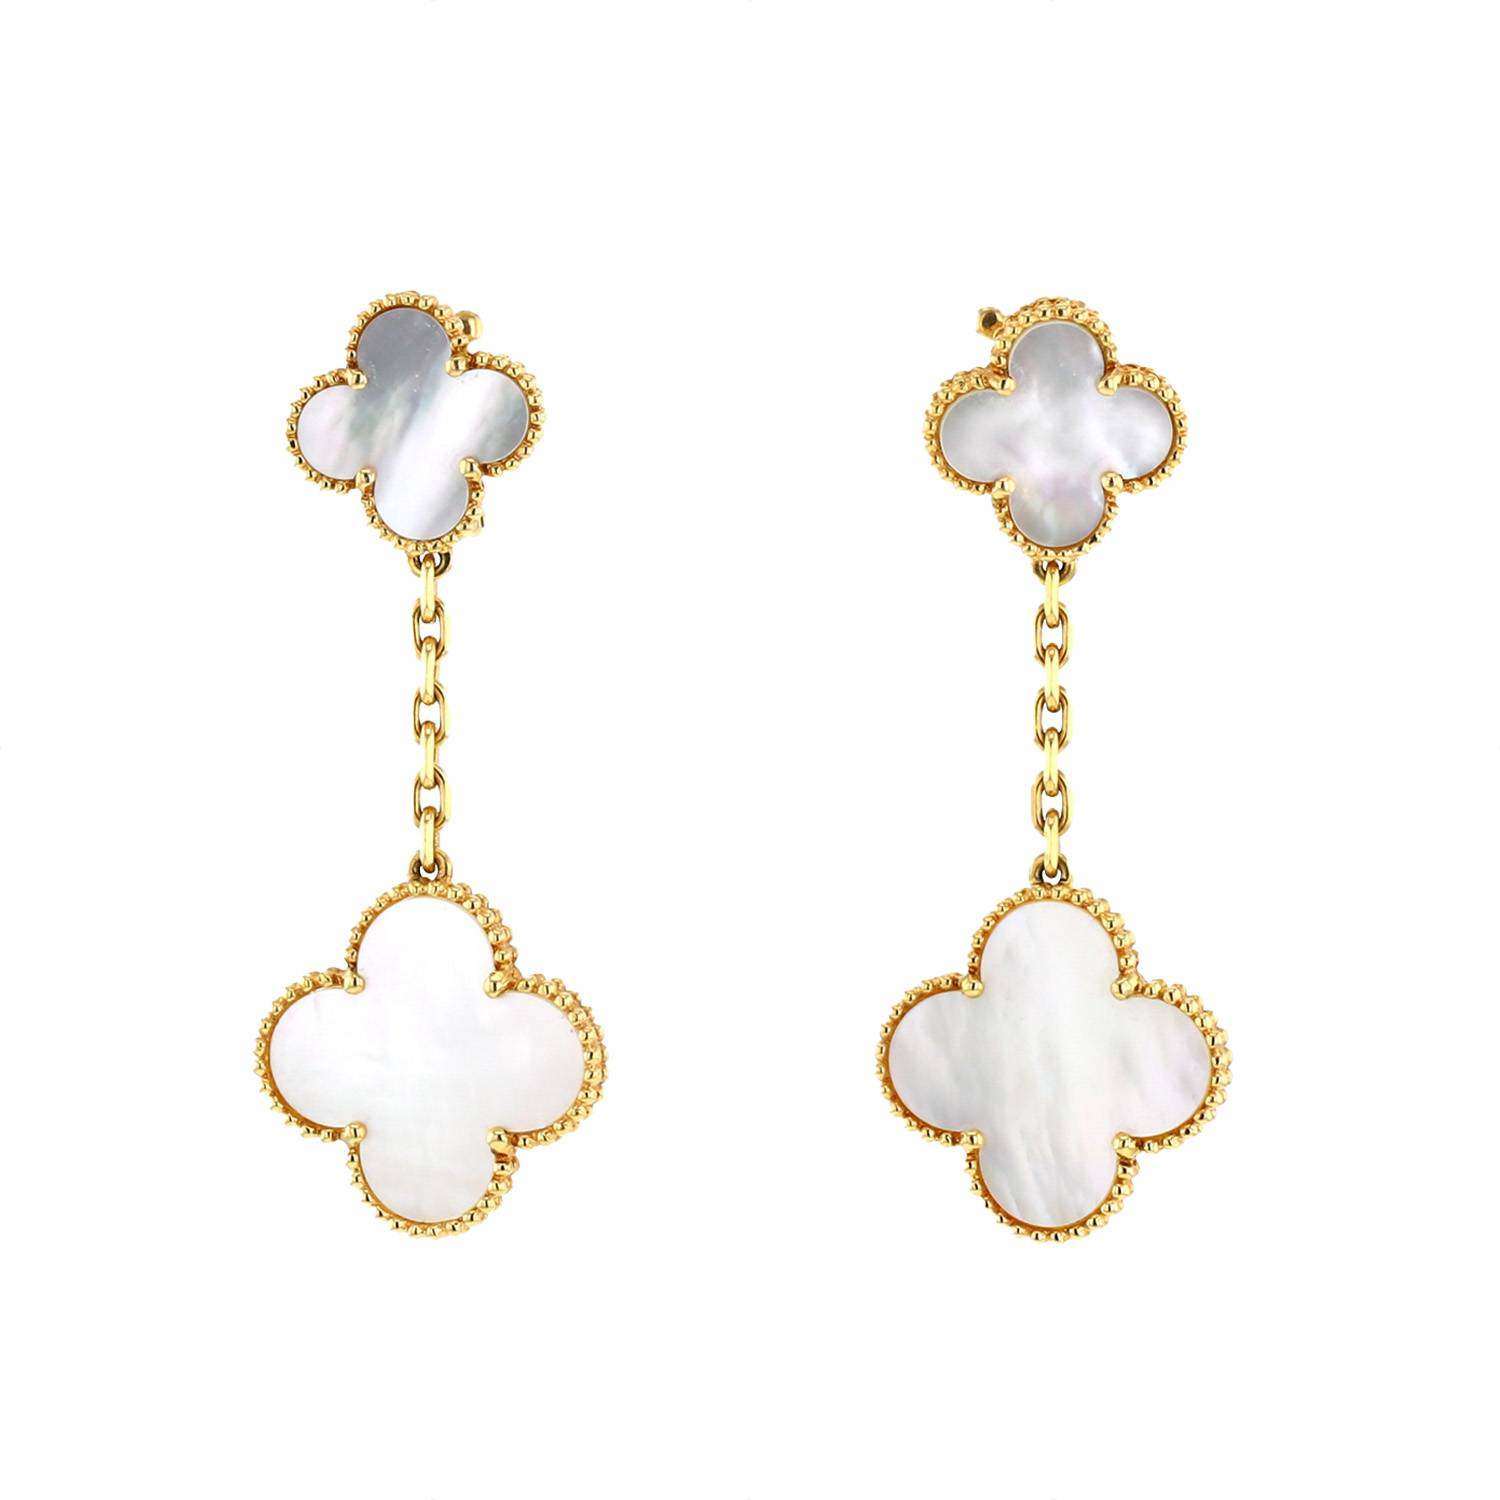 Van Cleef & Arpels Alhambra Earring 405595 | Collector Square